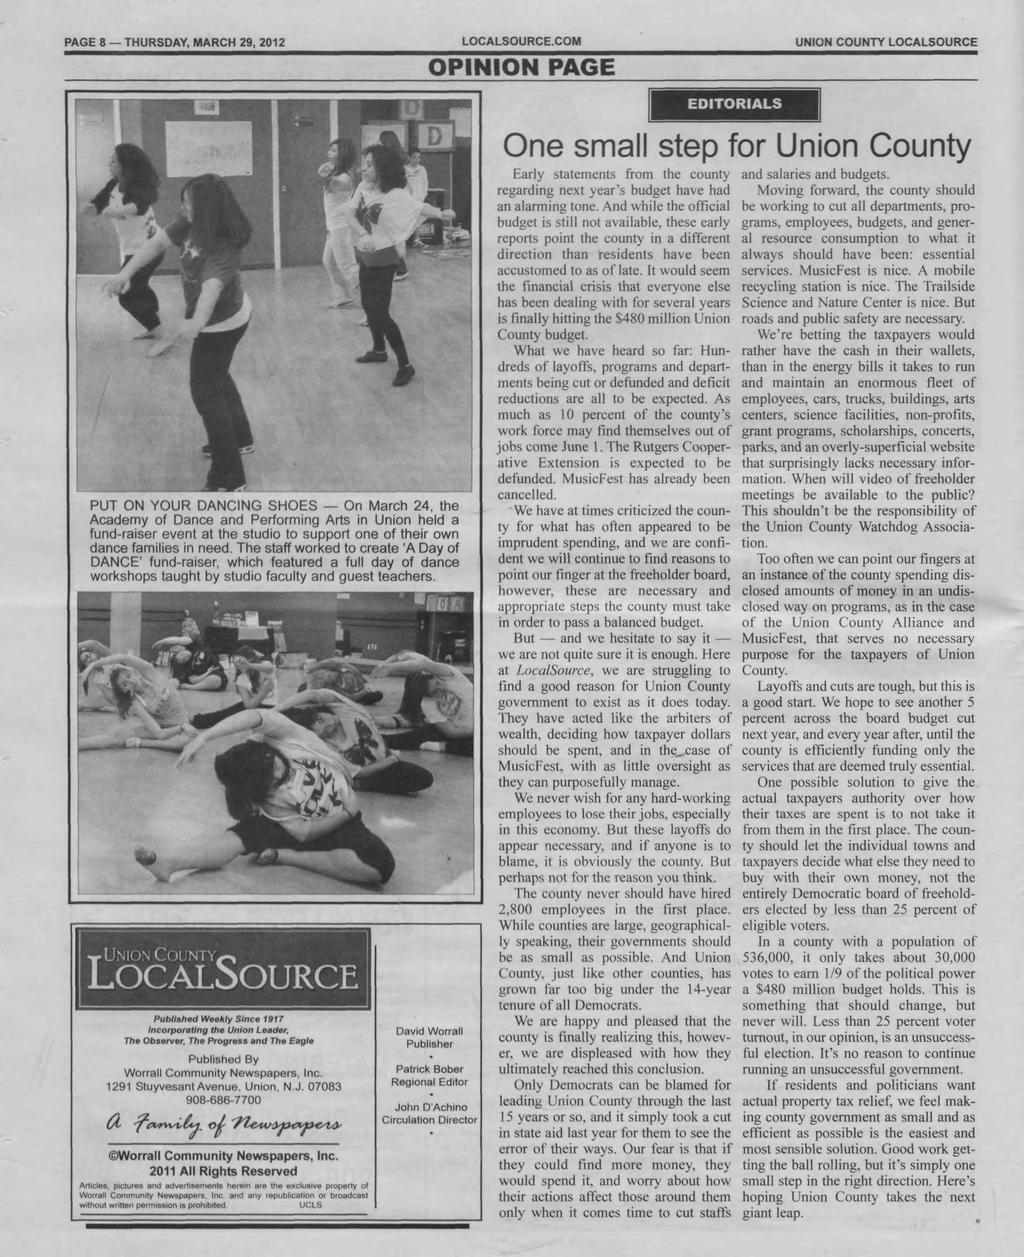 PAGE 8 THURSDAY, MARCH 29, 2012 LOCALSOURCE.